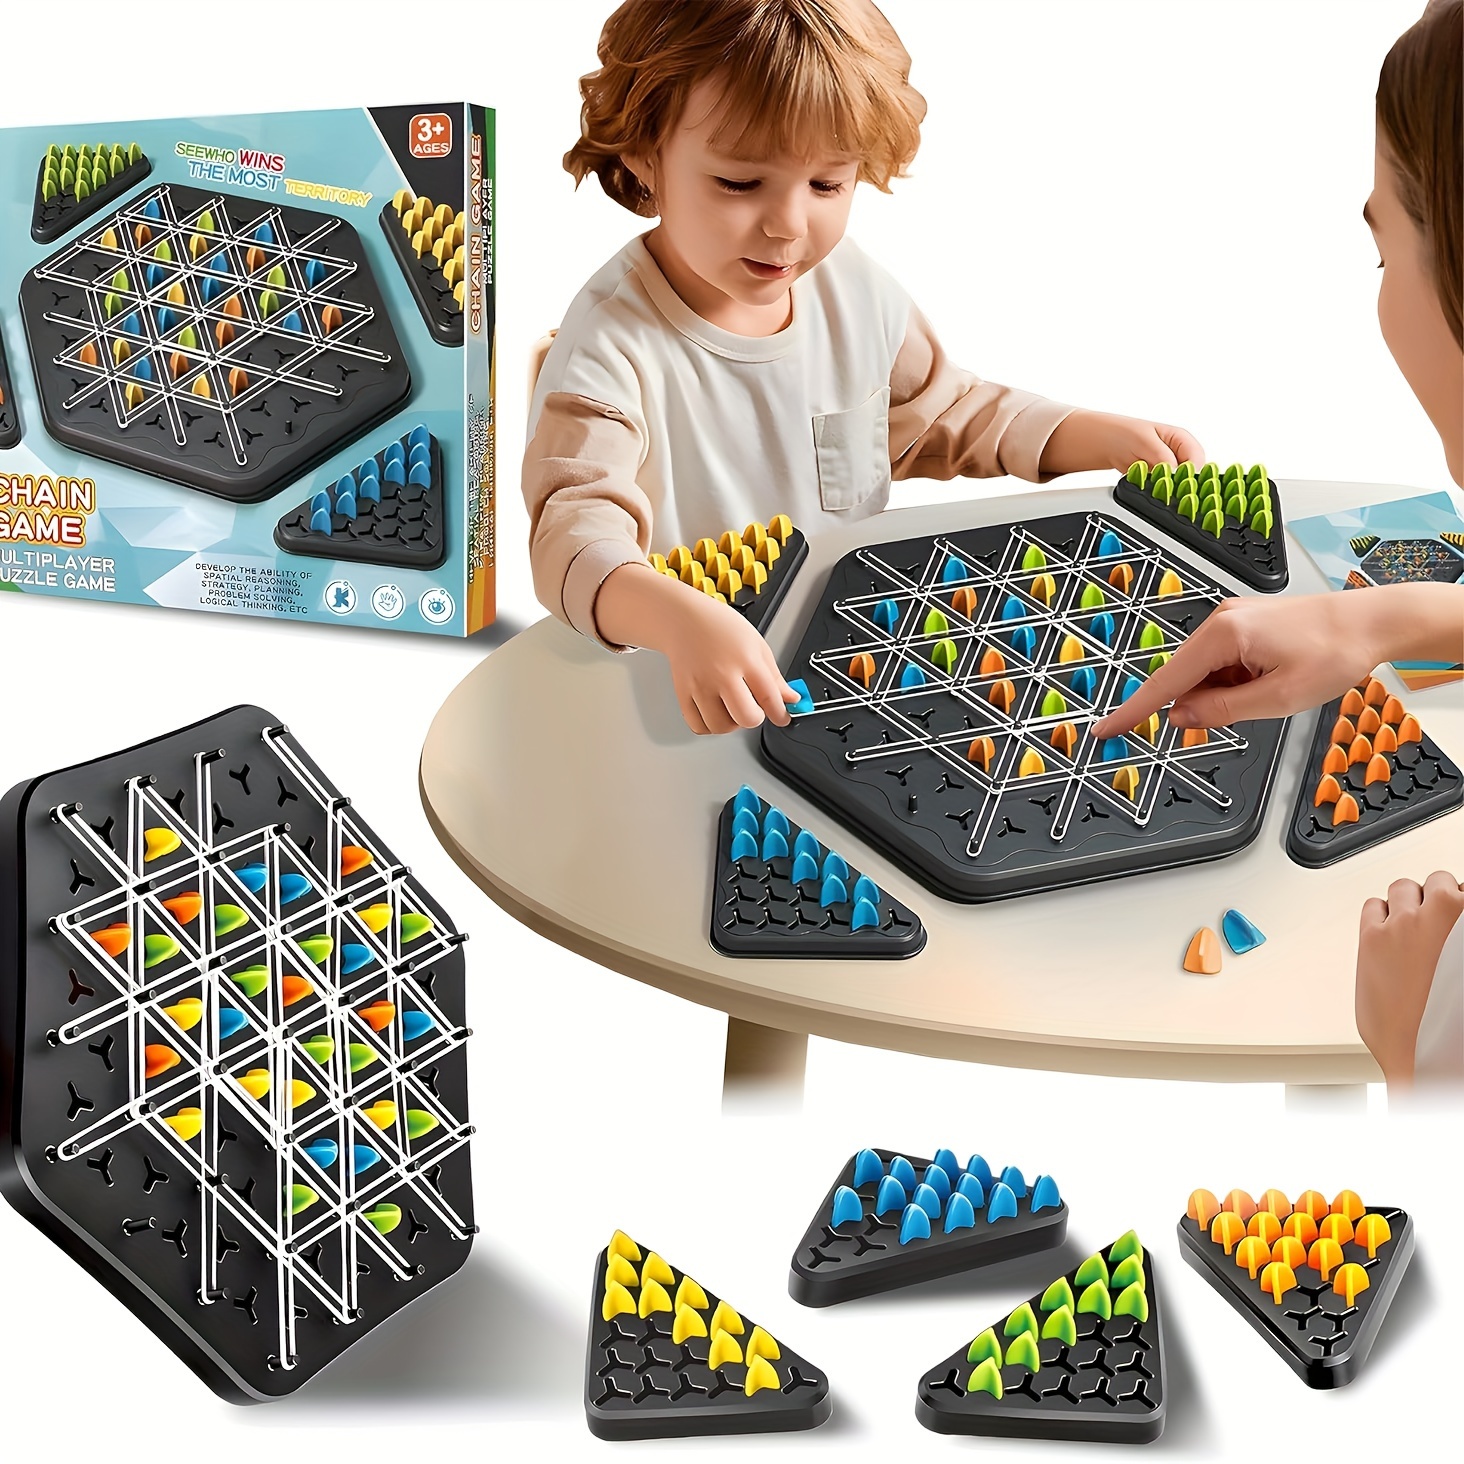 

Triangle Chess With Connected Lines: 2 To 4 Players Developing Logical Thinking In Children - Strategy Board Game For Kids 3+ Years